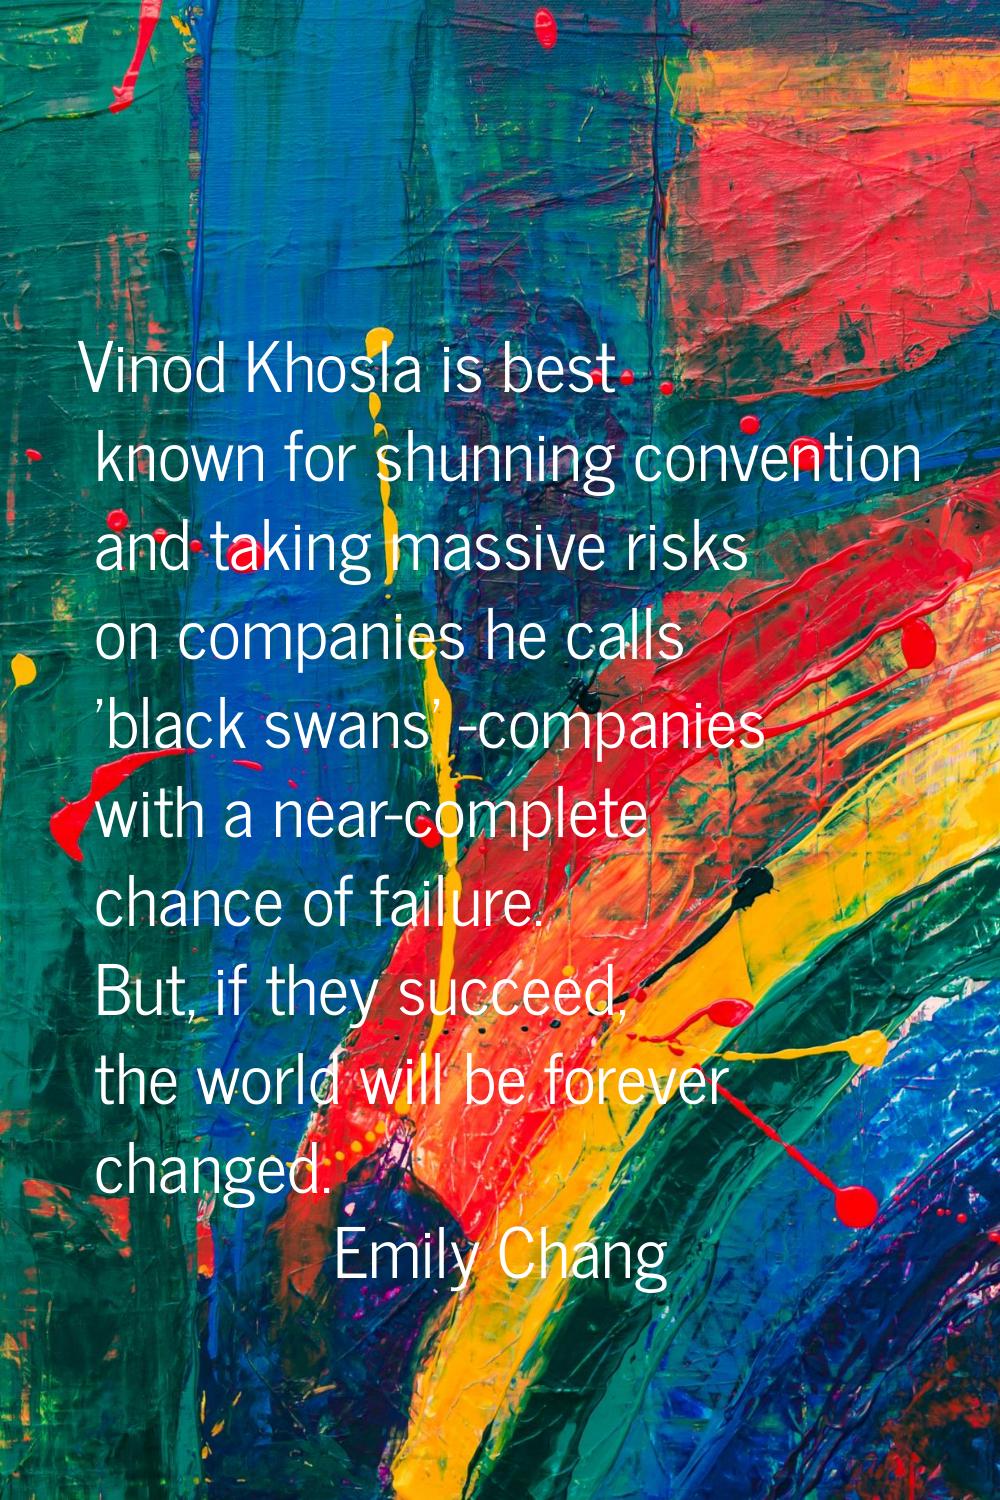 Vinod Khosla is best known for shunning convention and taking massive risks on companies he calls '